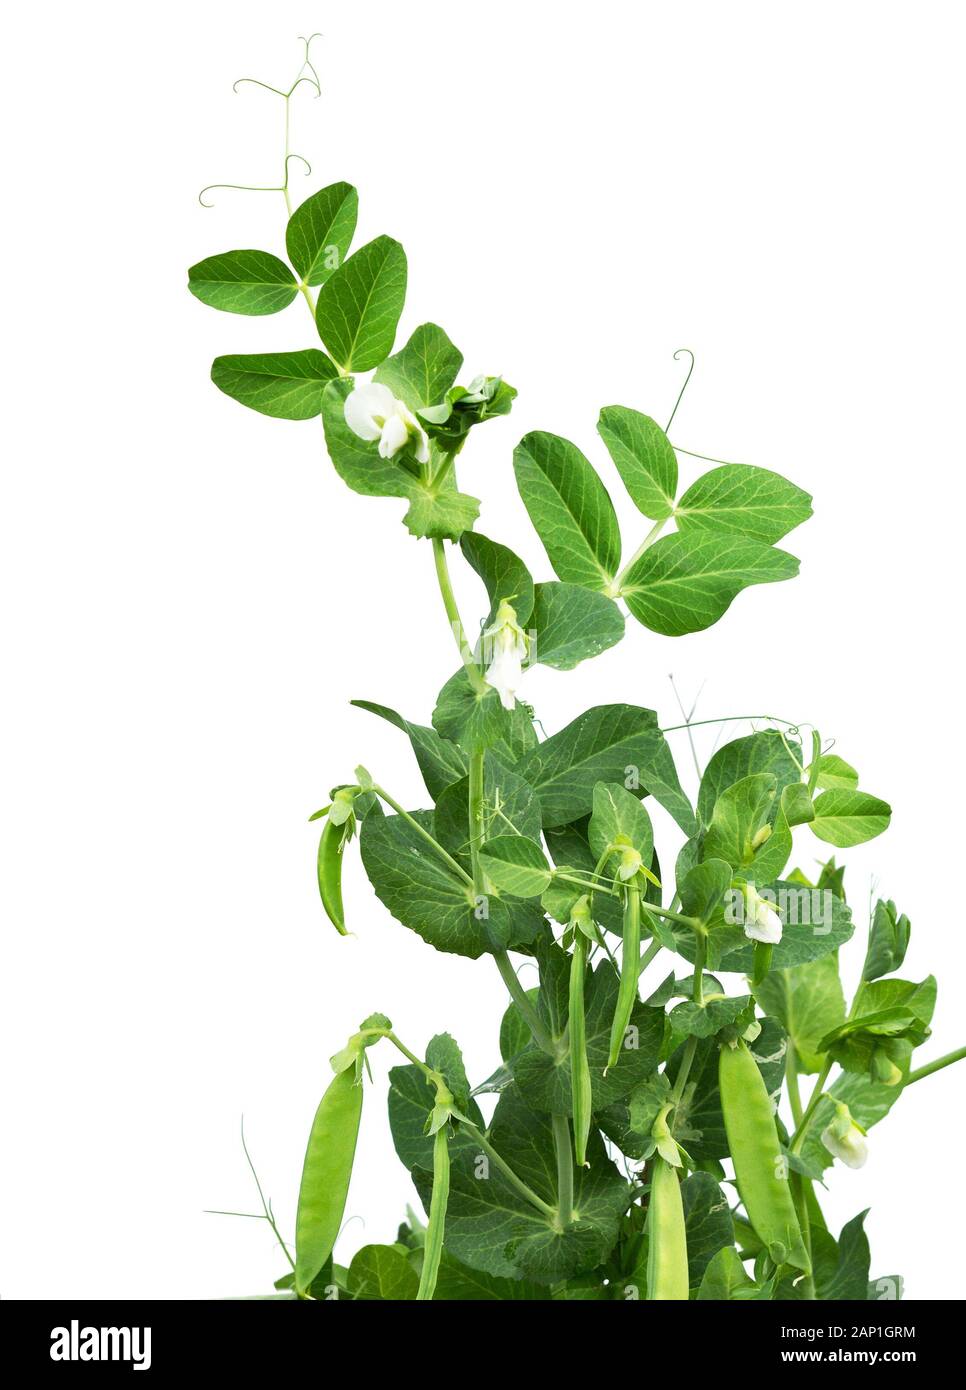 Peas plant with flowers and pods isolated on white. Pea plant (pisum sativum)  growing in a garden. Stock Photo